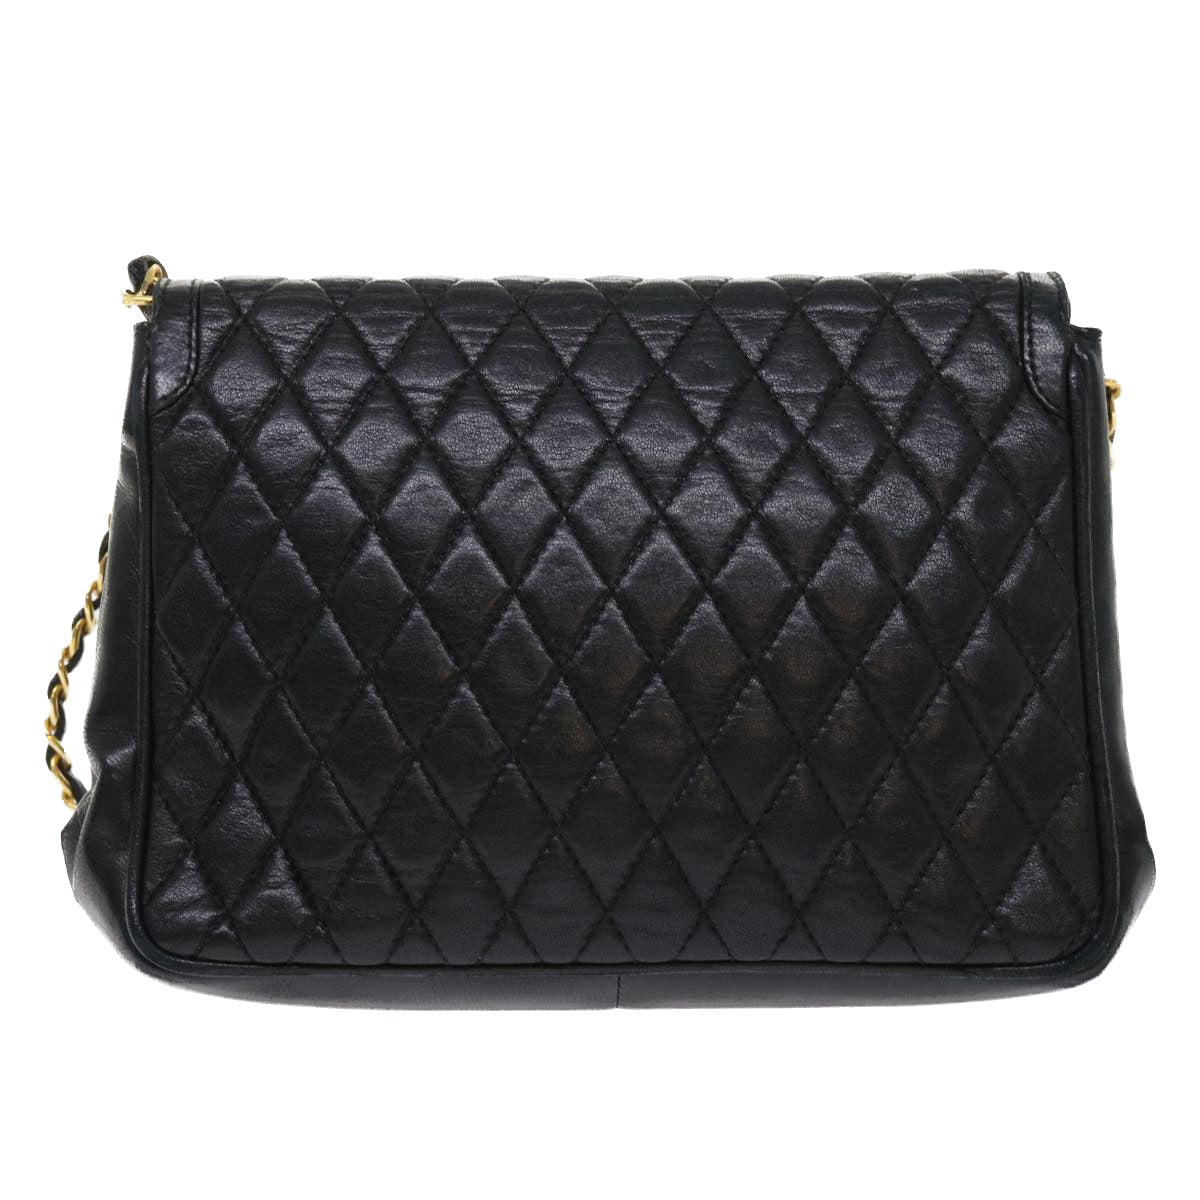 BALLY Chain Quilted Shoulder Bag Leather Black Auth am4635 - 0